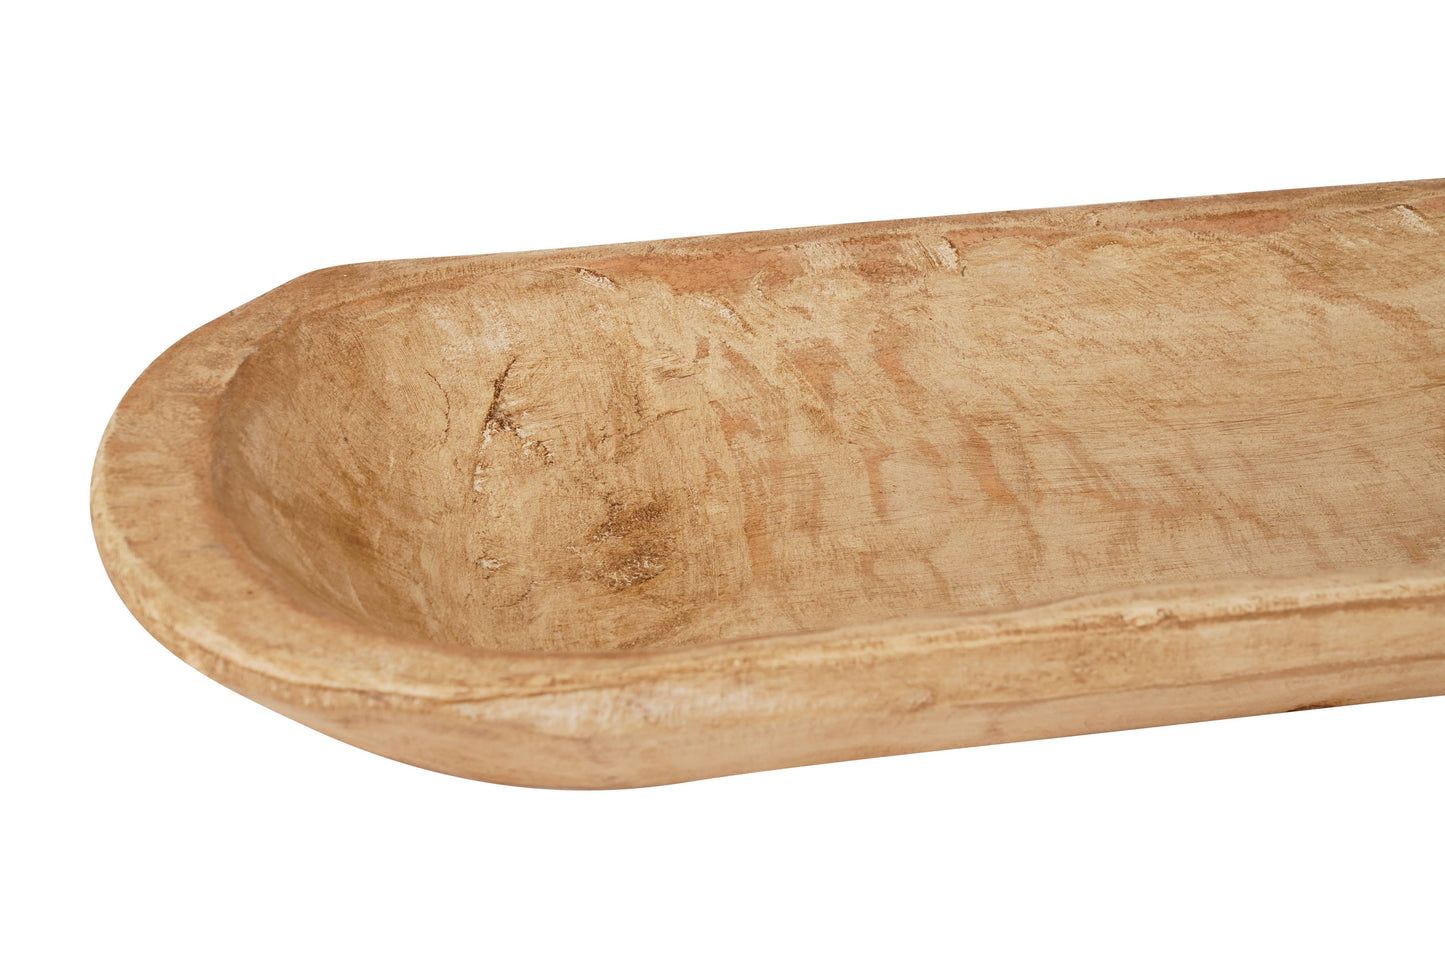 Baguette-Small Bread Bowl-Home Decor #2-Wooden-6x20 inches: Black